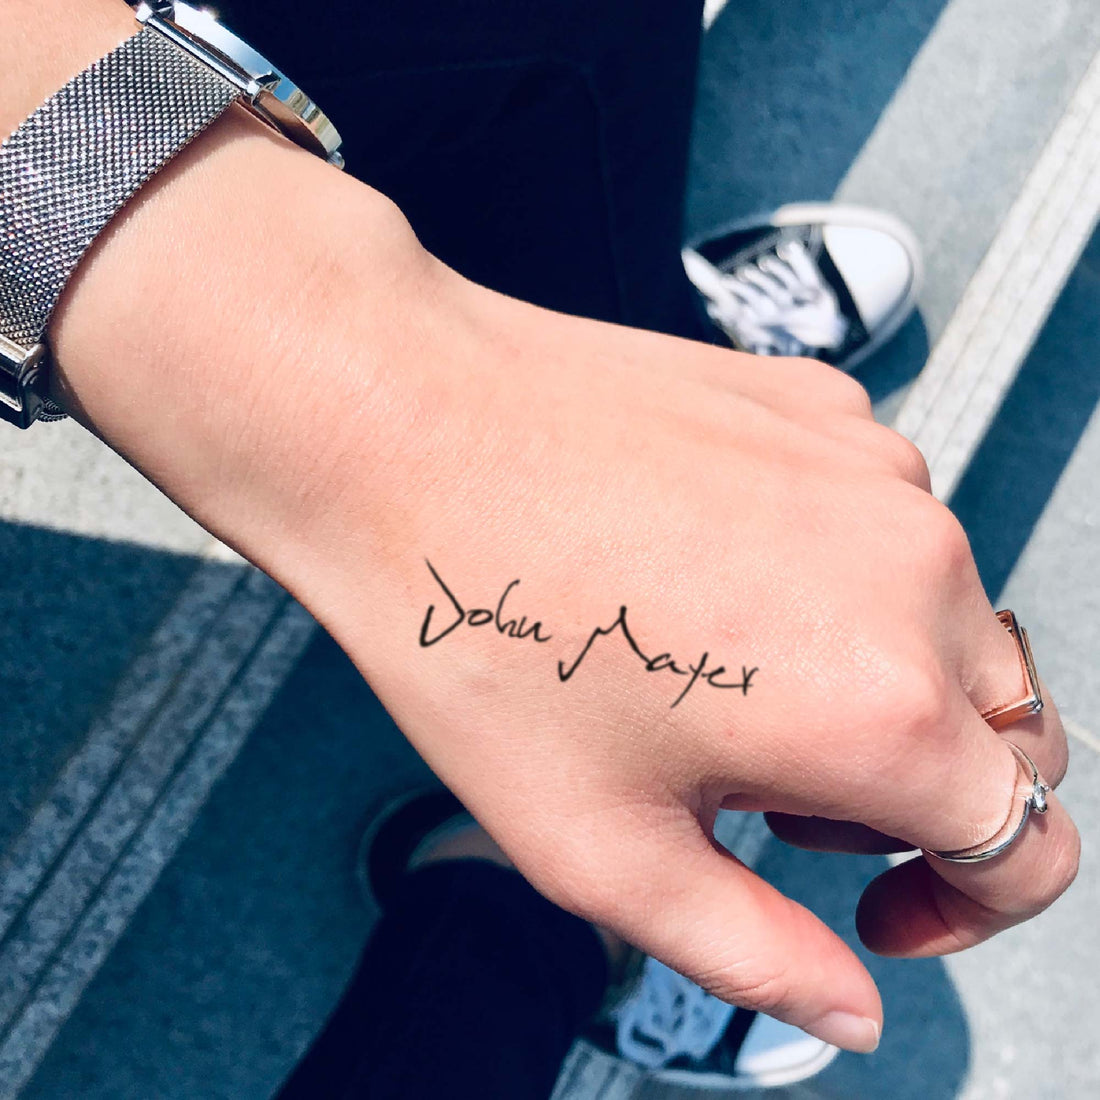 John Mayer custom temporary tattoo sticker design idea inspiration meanings removal arm wrist hand words font name signature calligraphy lyrics tour concert outfits merch accessory gift souvenir costumes wear dress up code